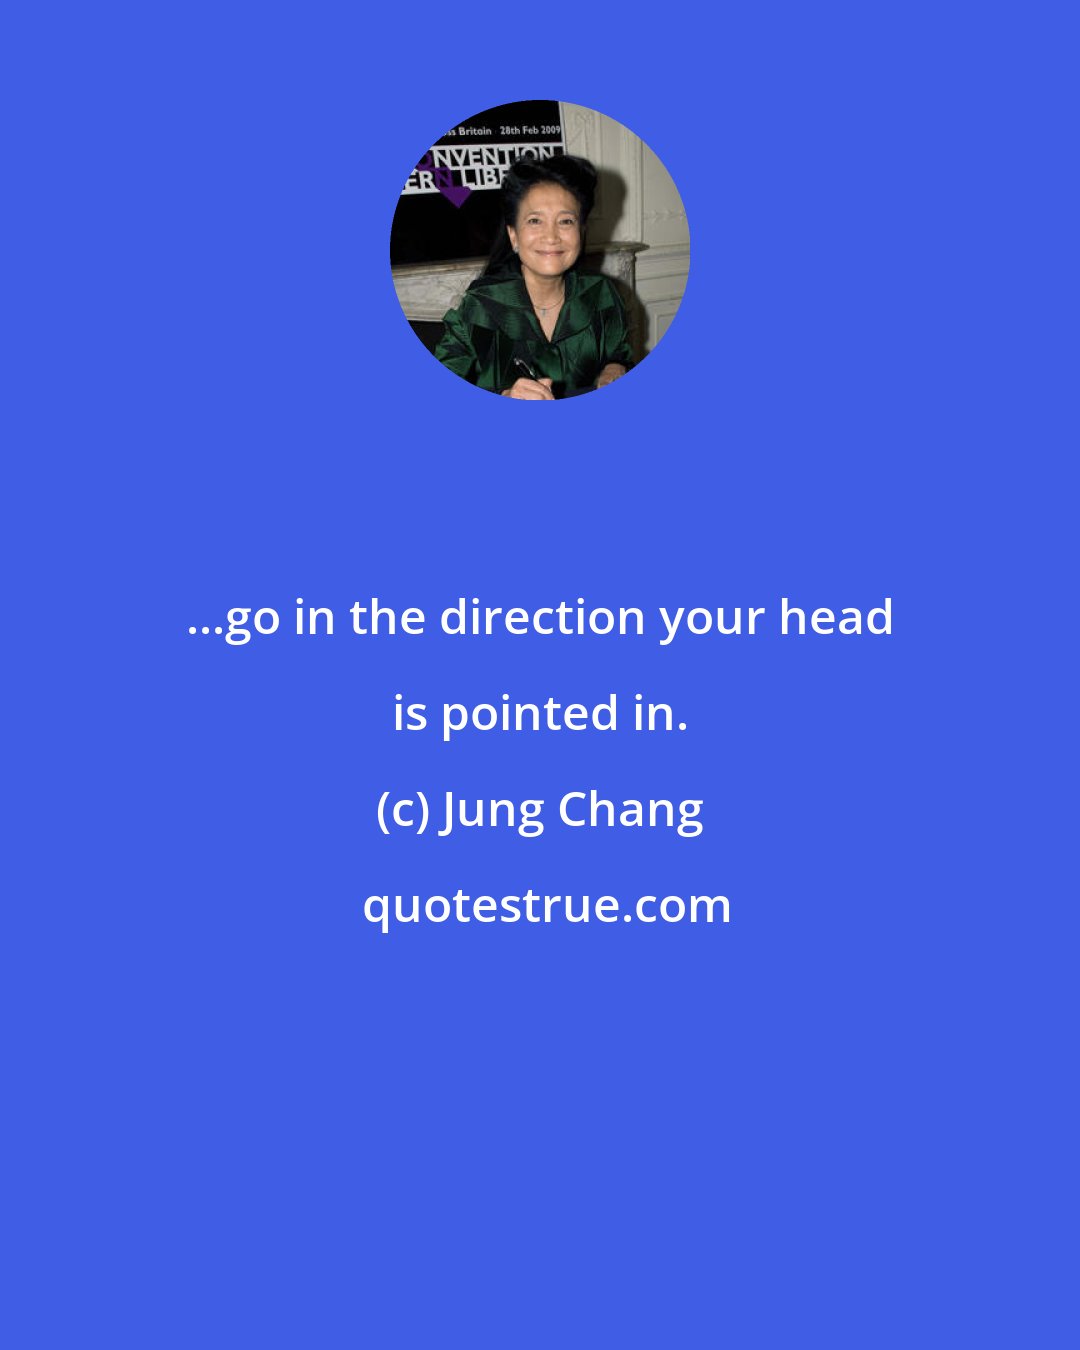 Jung Chang: ...go in the direction your head is pointed in.